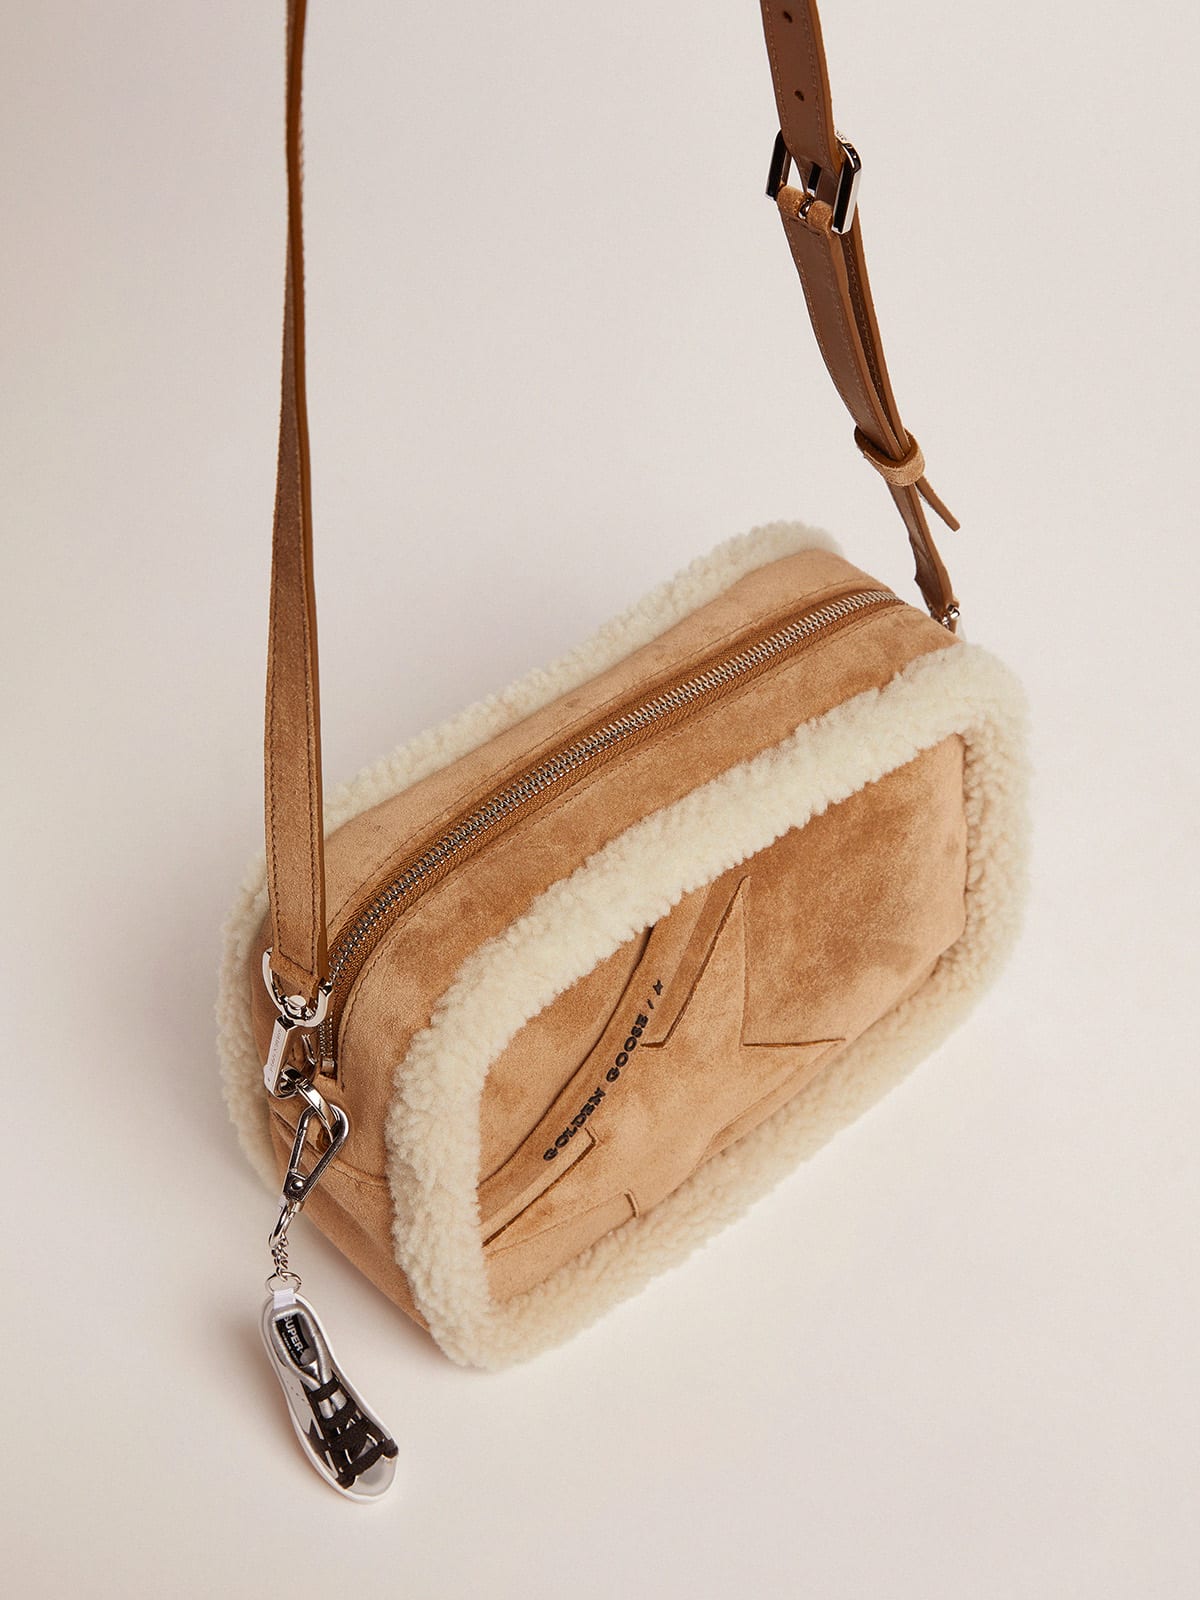 Golden Goose - Star Bag made of suede leather with shearling edging in 